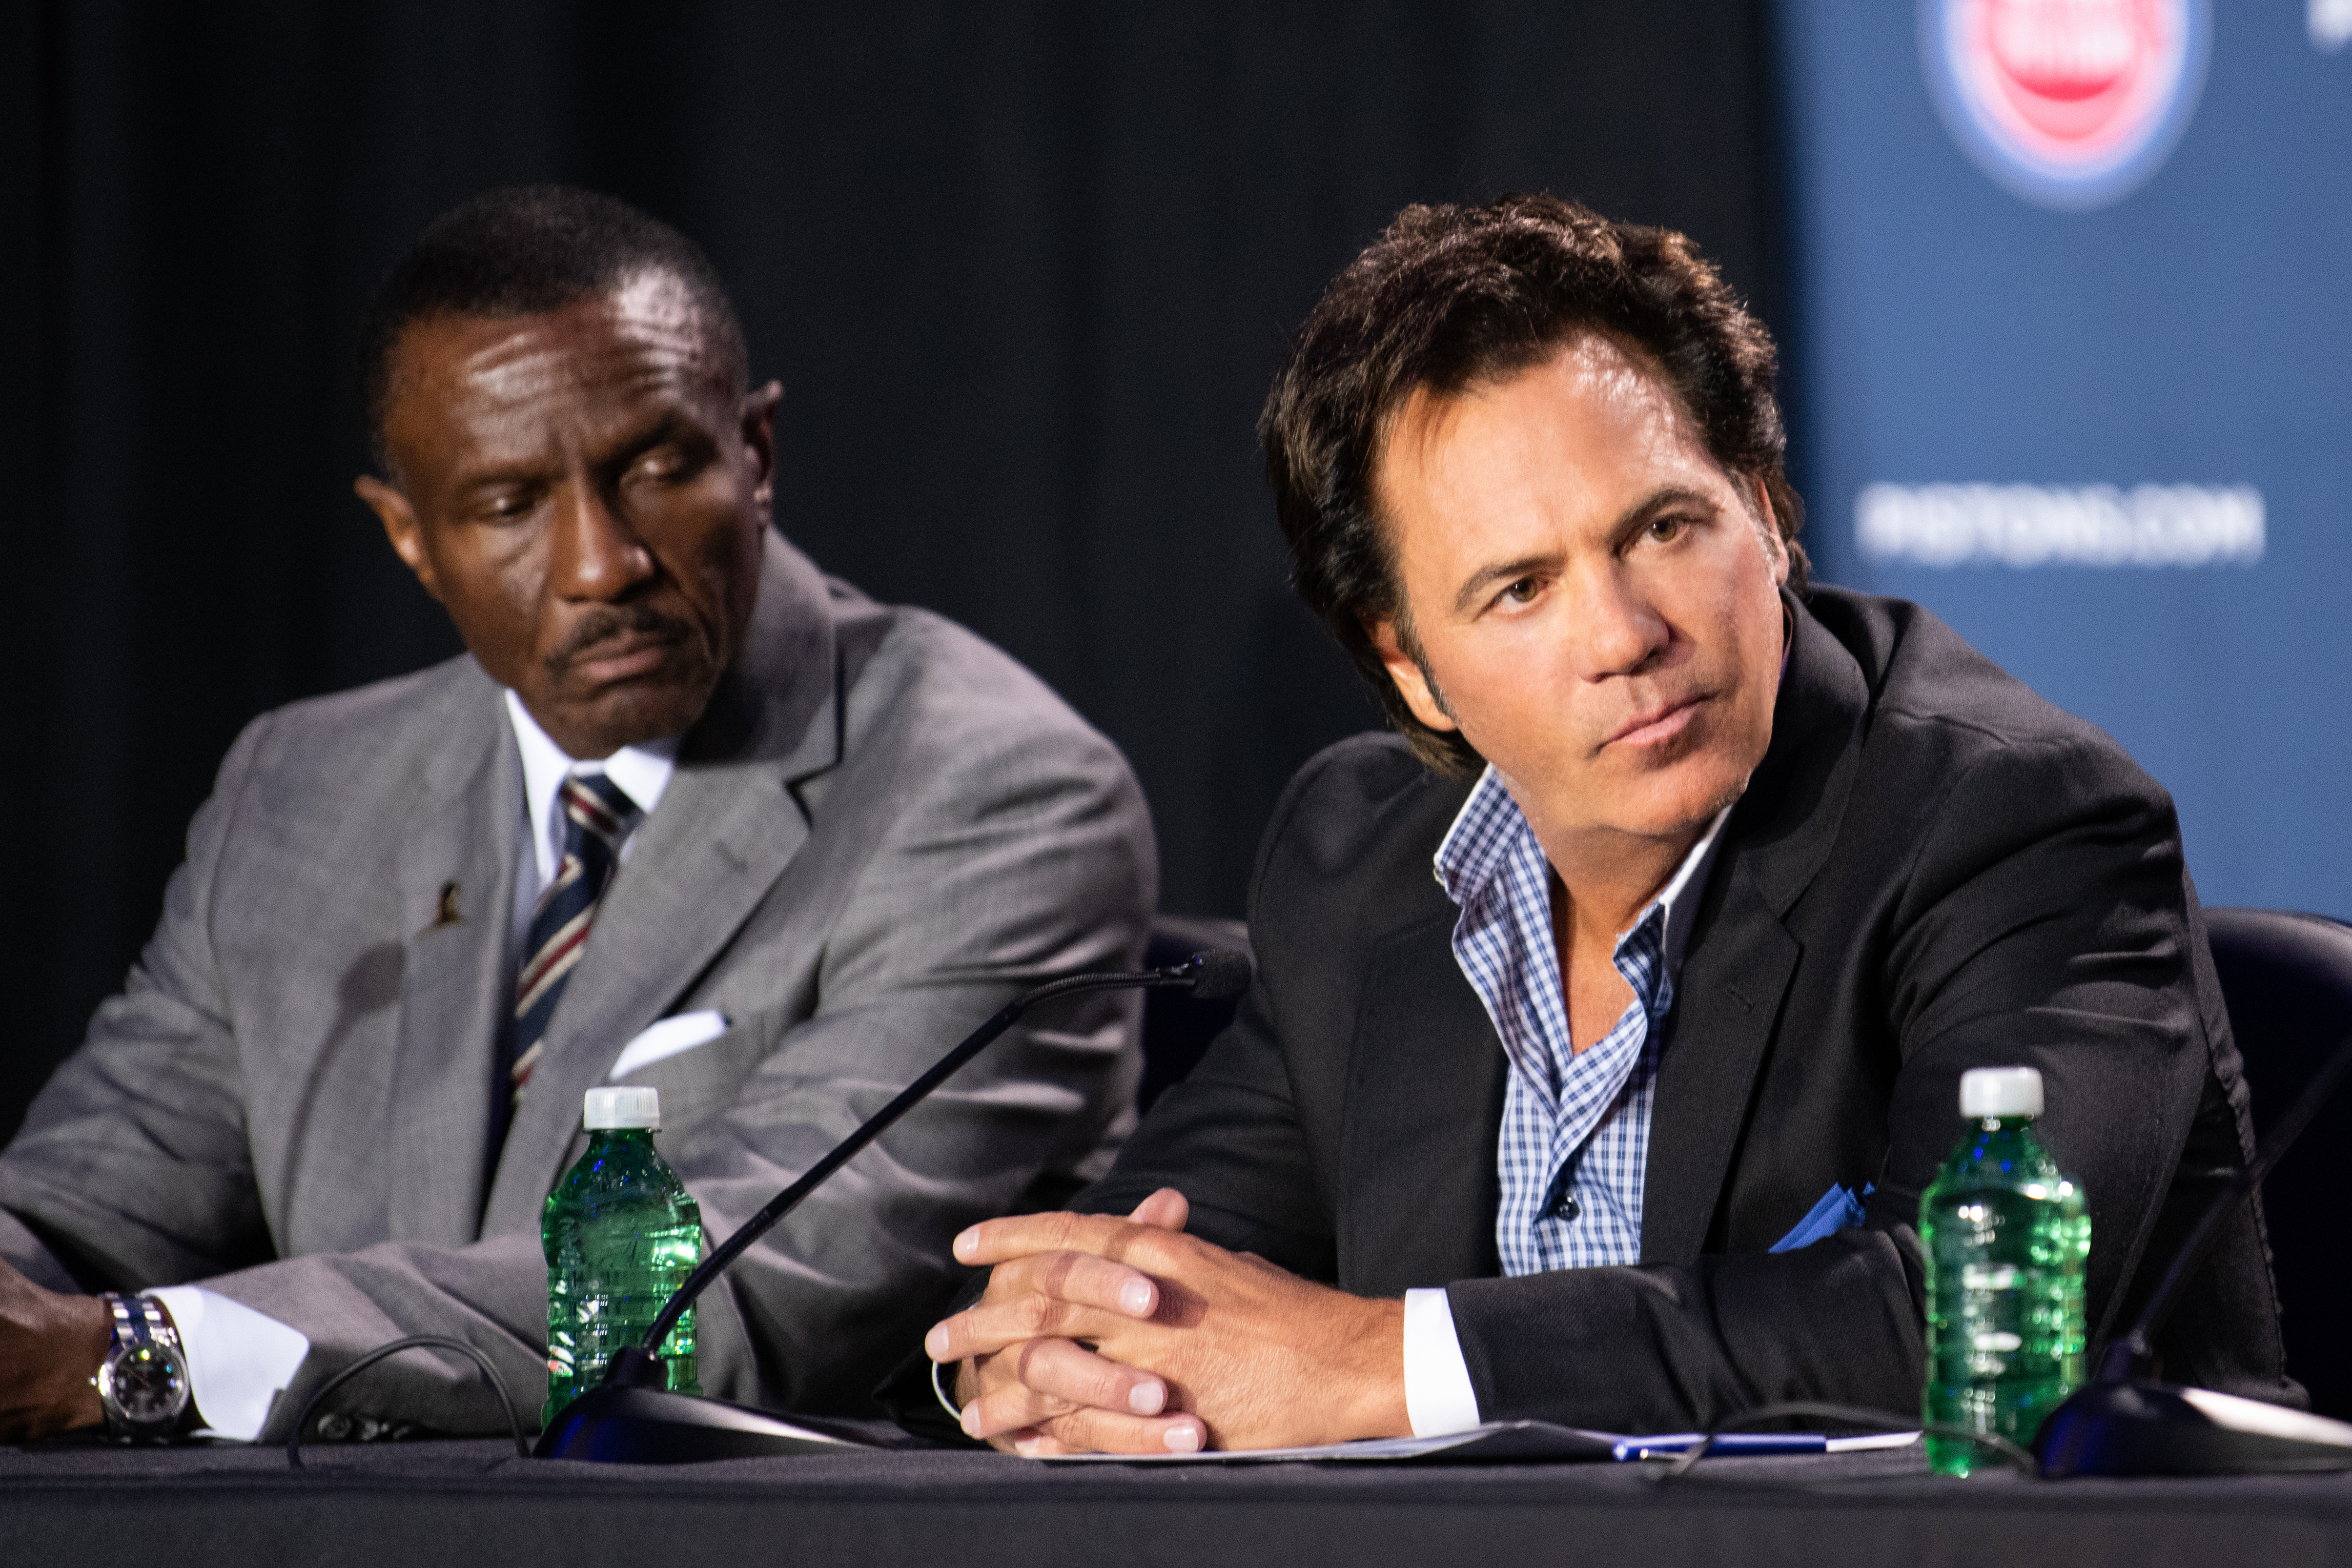 Detroit Pistons owner Tom Gores offers strong commitment to head coach Dwane Casey